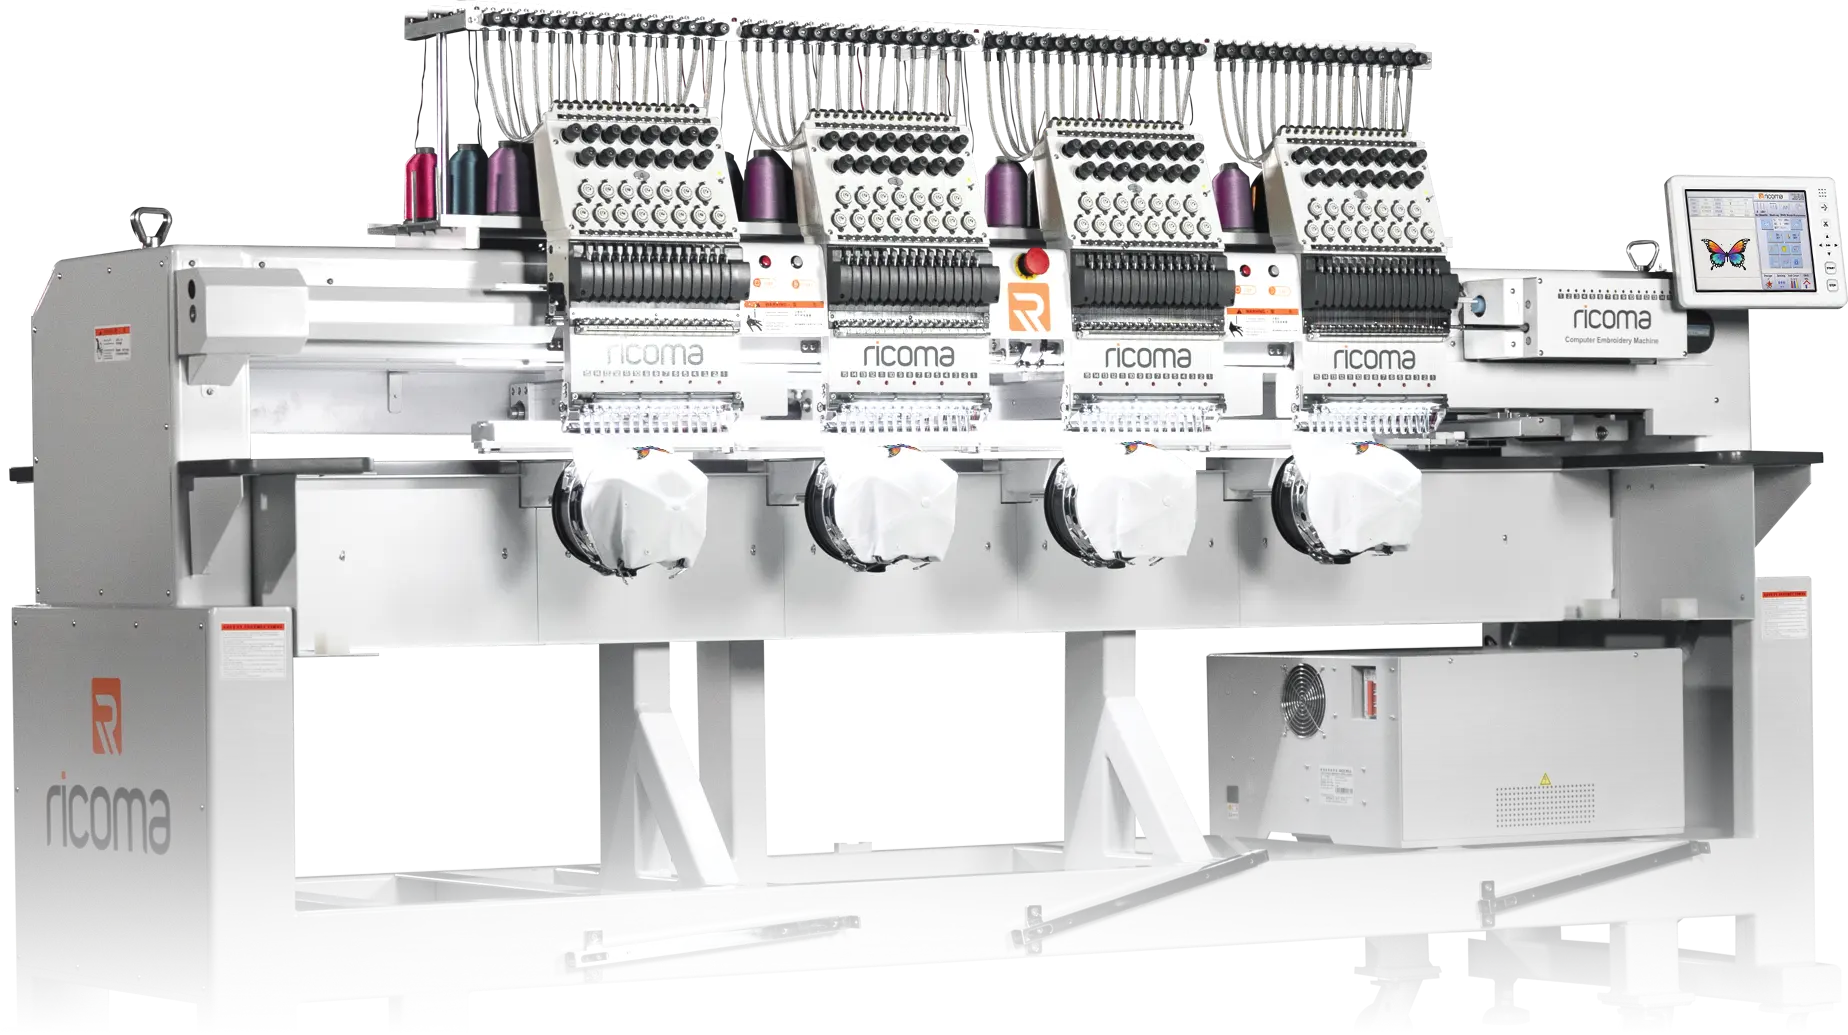 Are you looking to purchase an Ricoma 6 Head Embroidery Machine Apparel  Equipment Services Supplies ? Buy now before they go out of stock